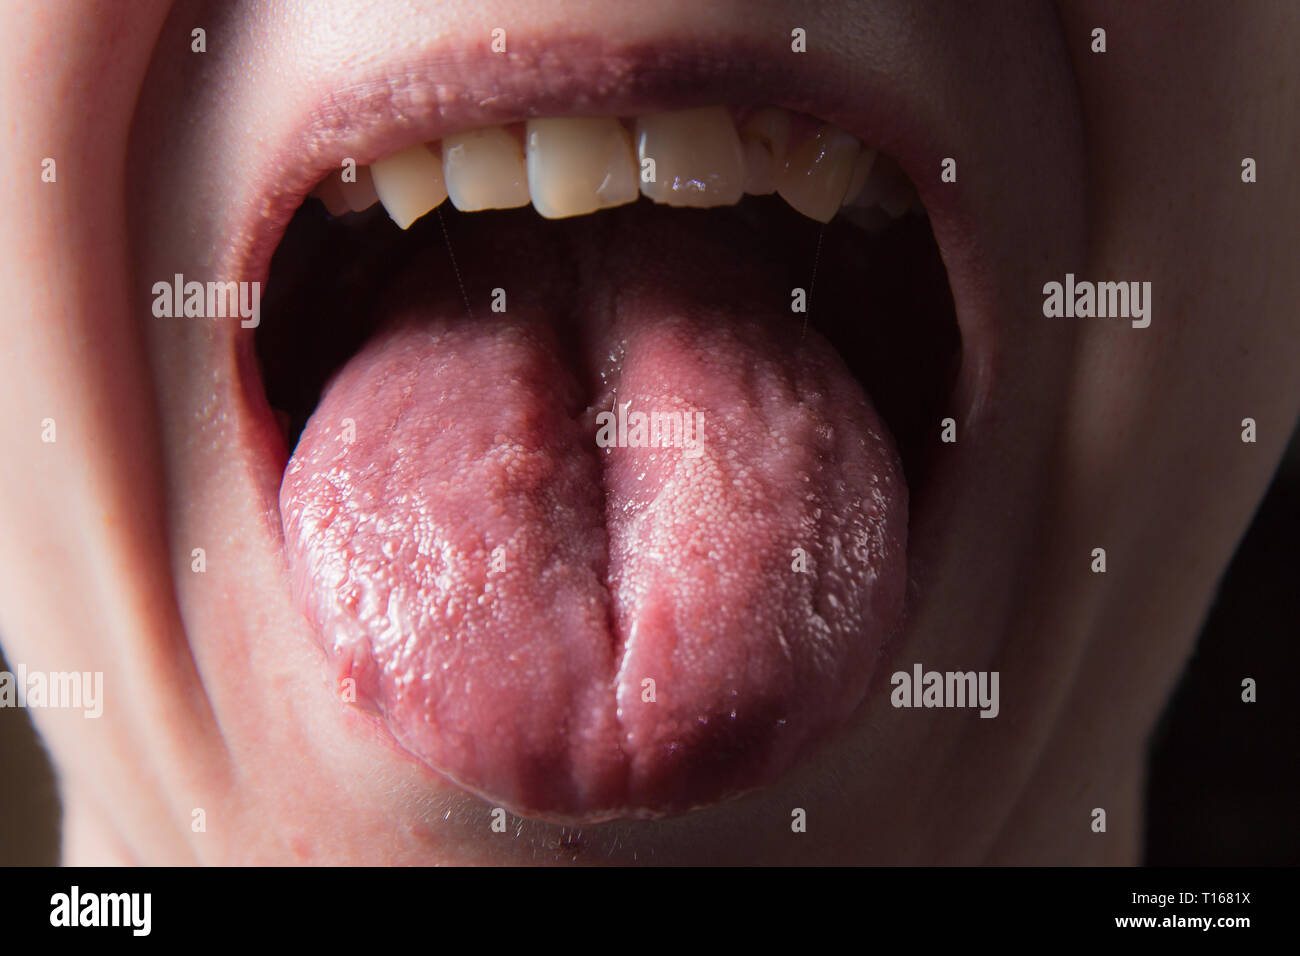 Male shows overgrowth candidiasis on his tongue Stock Photo